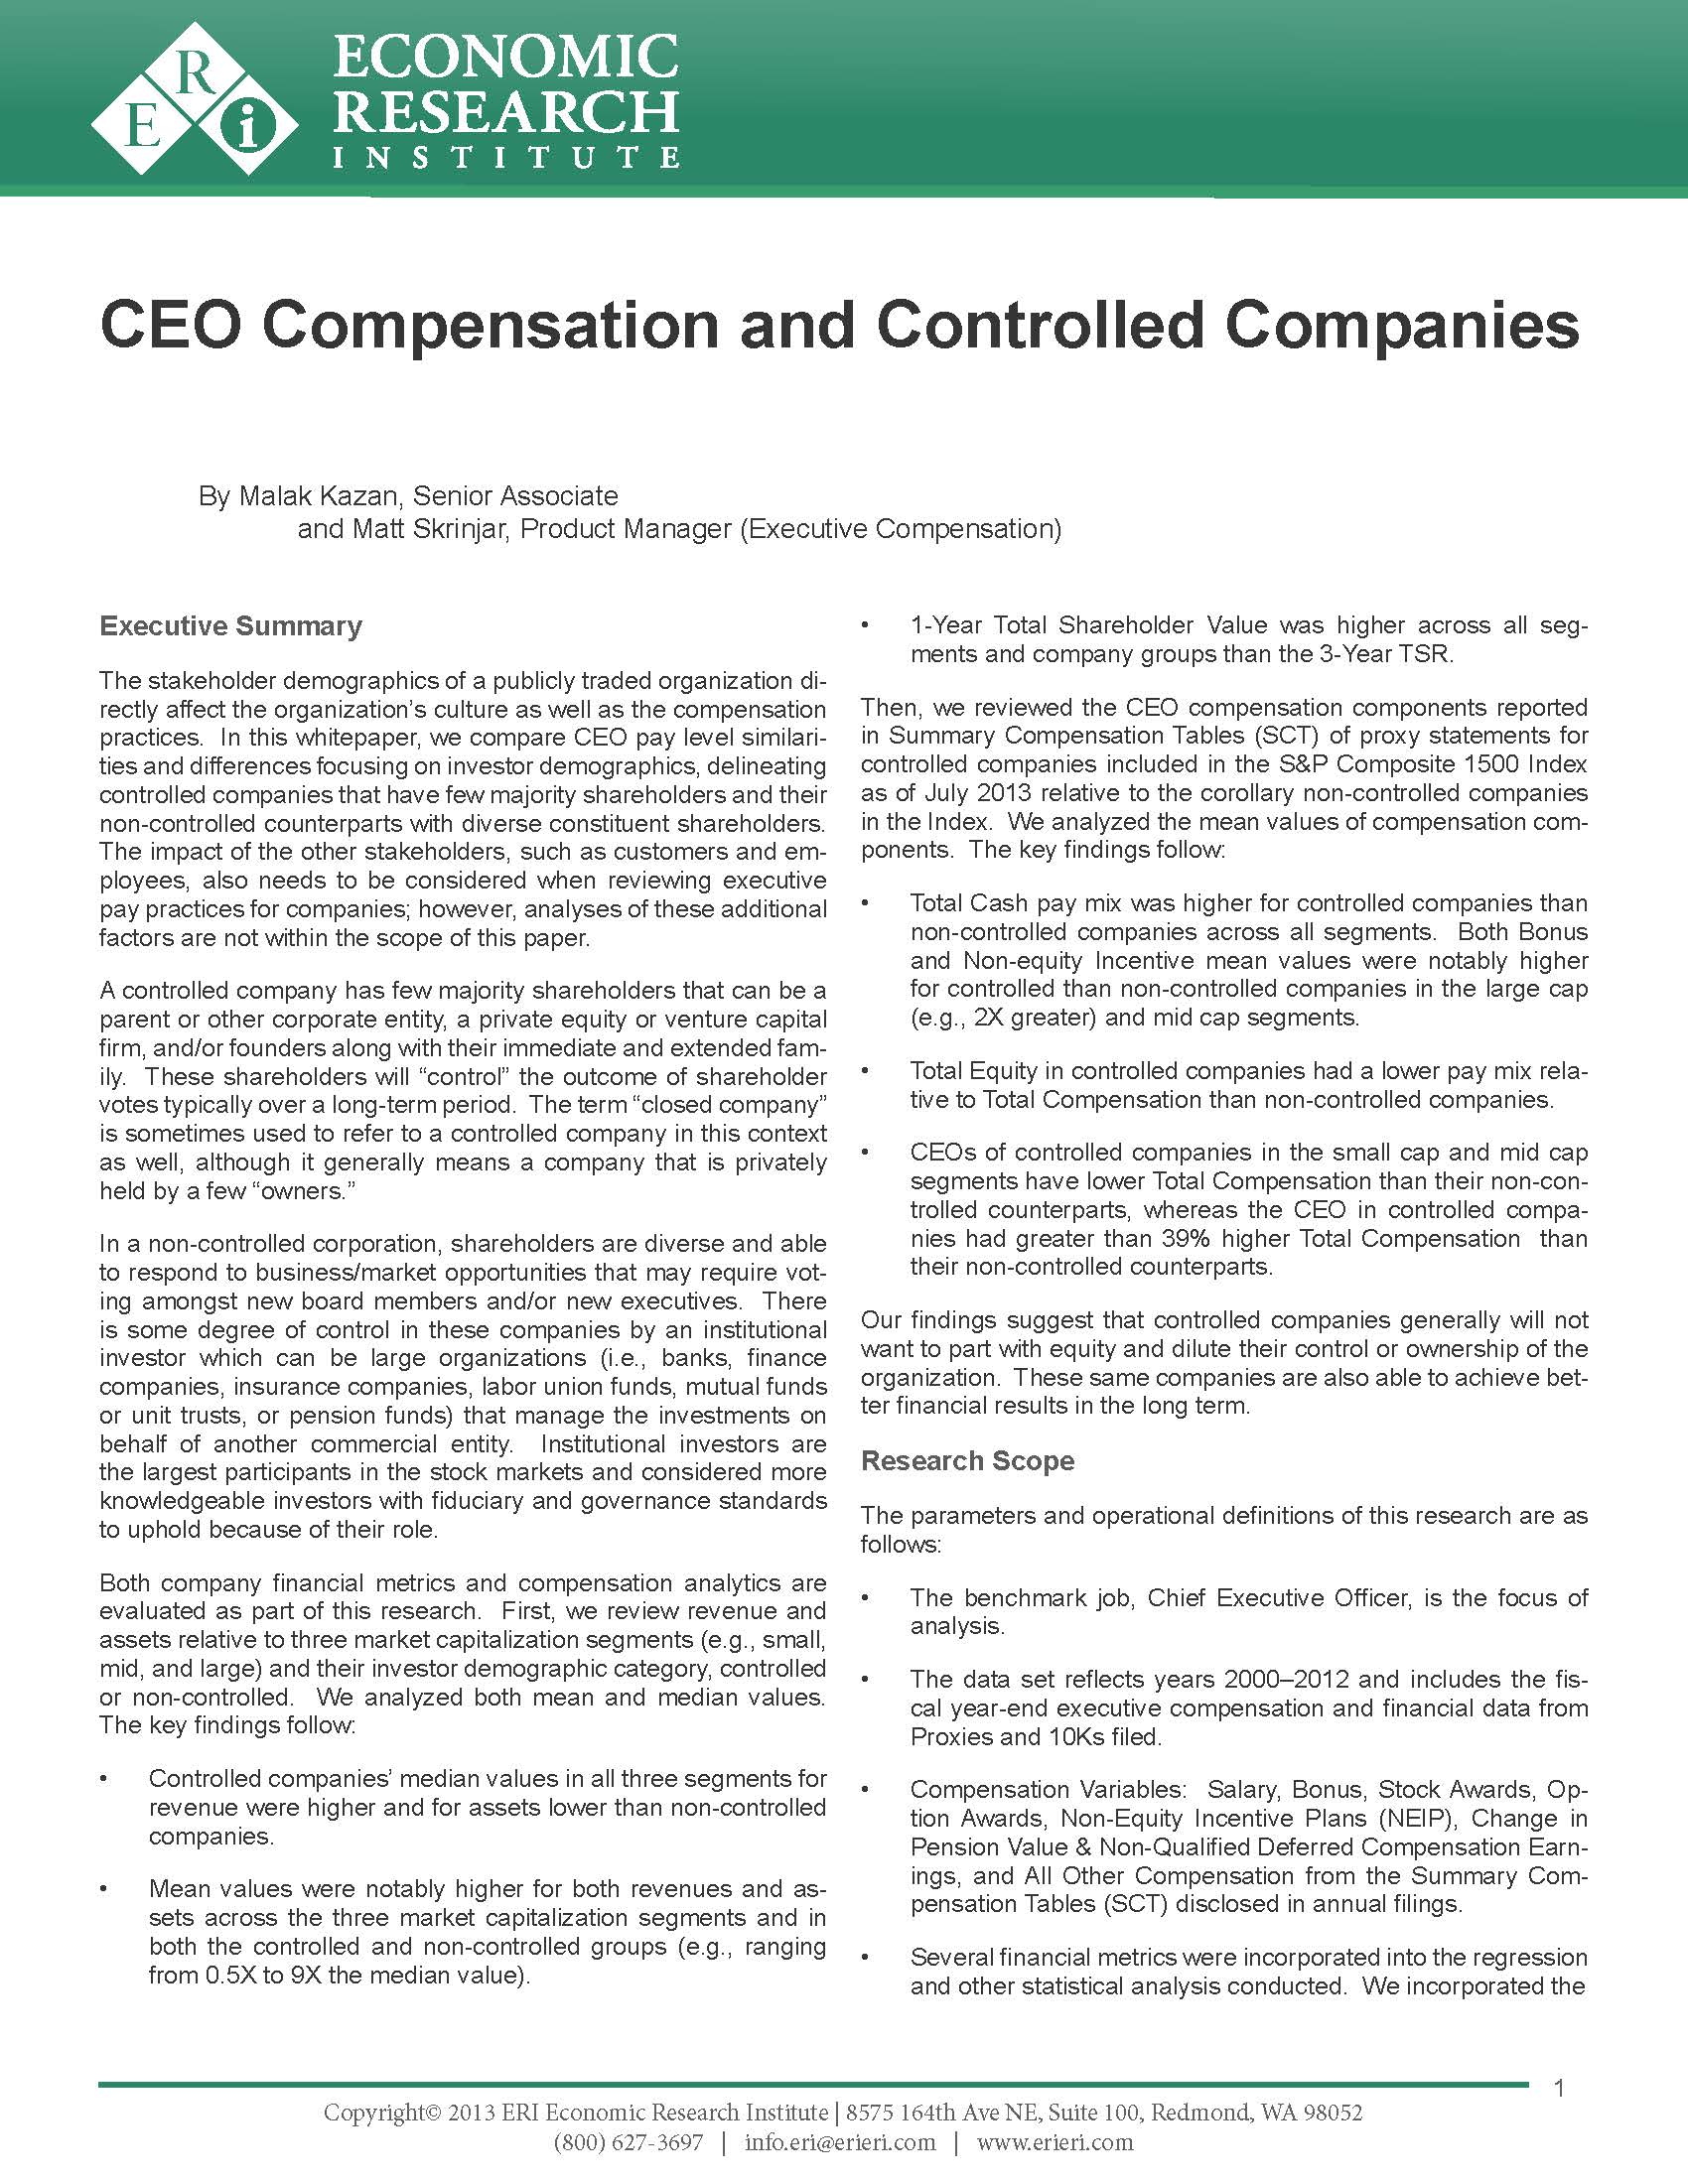 Controlled_Companies_2_Page_1